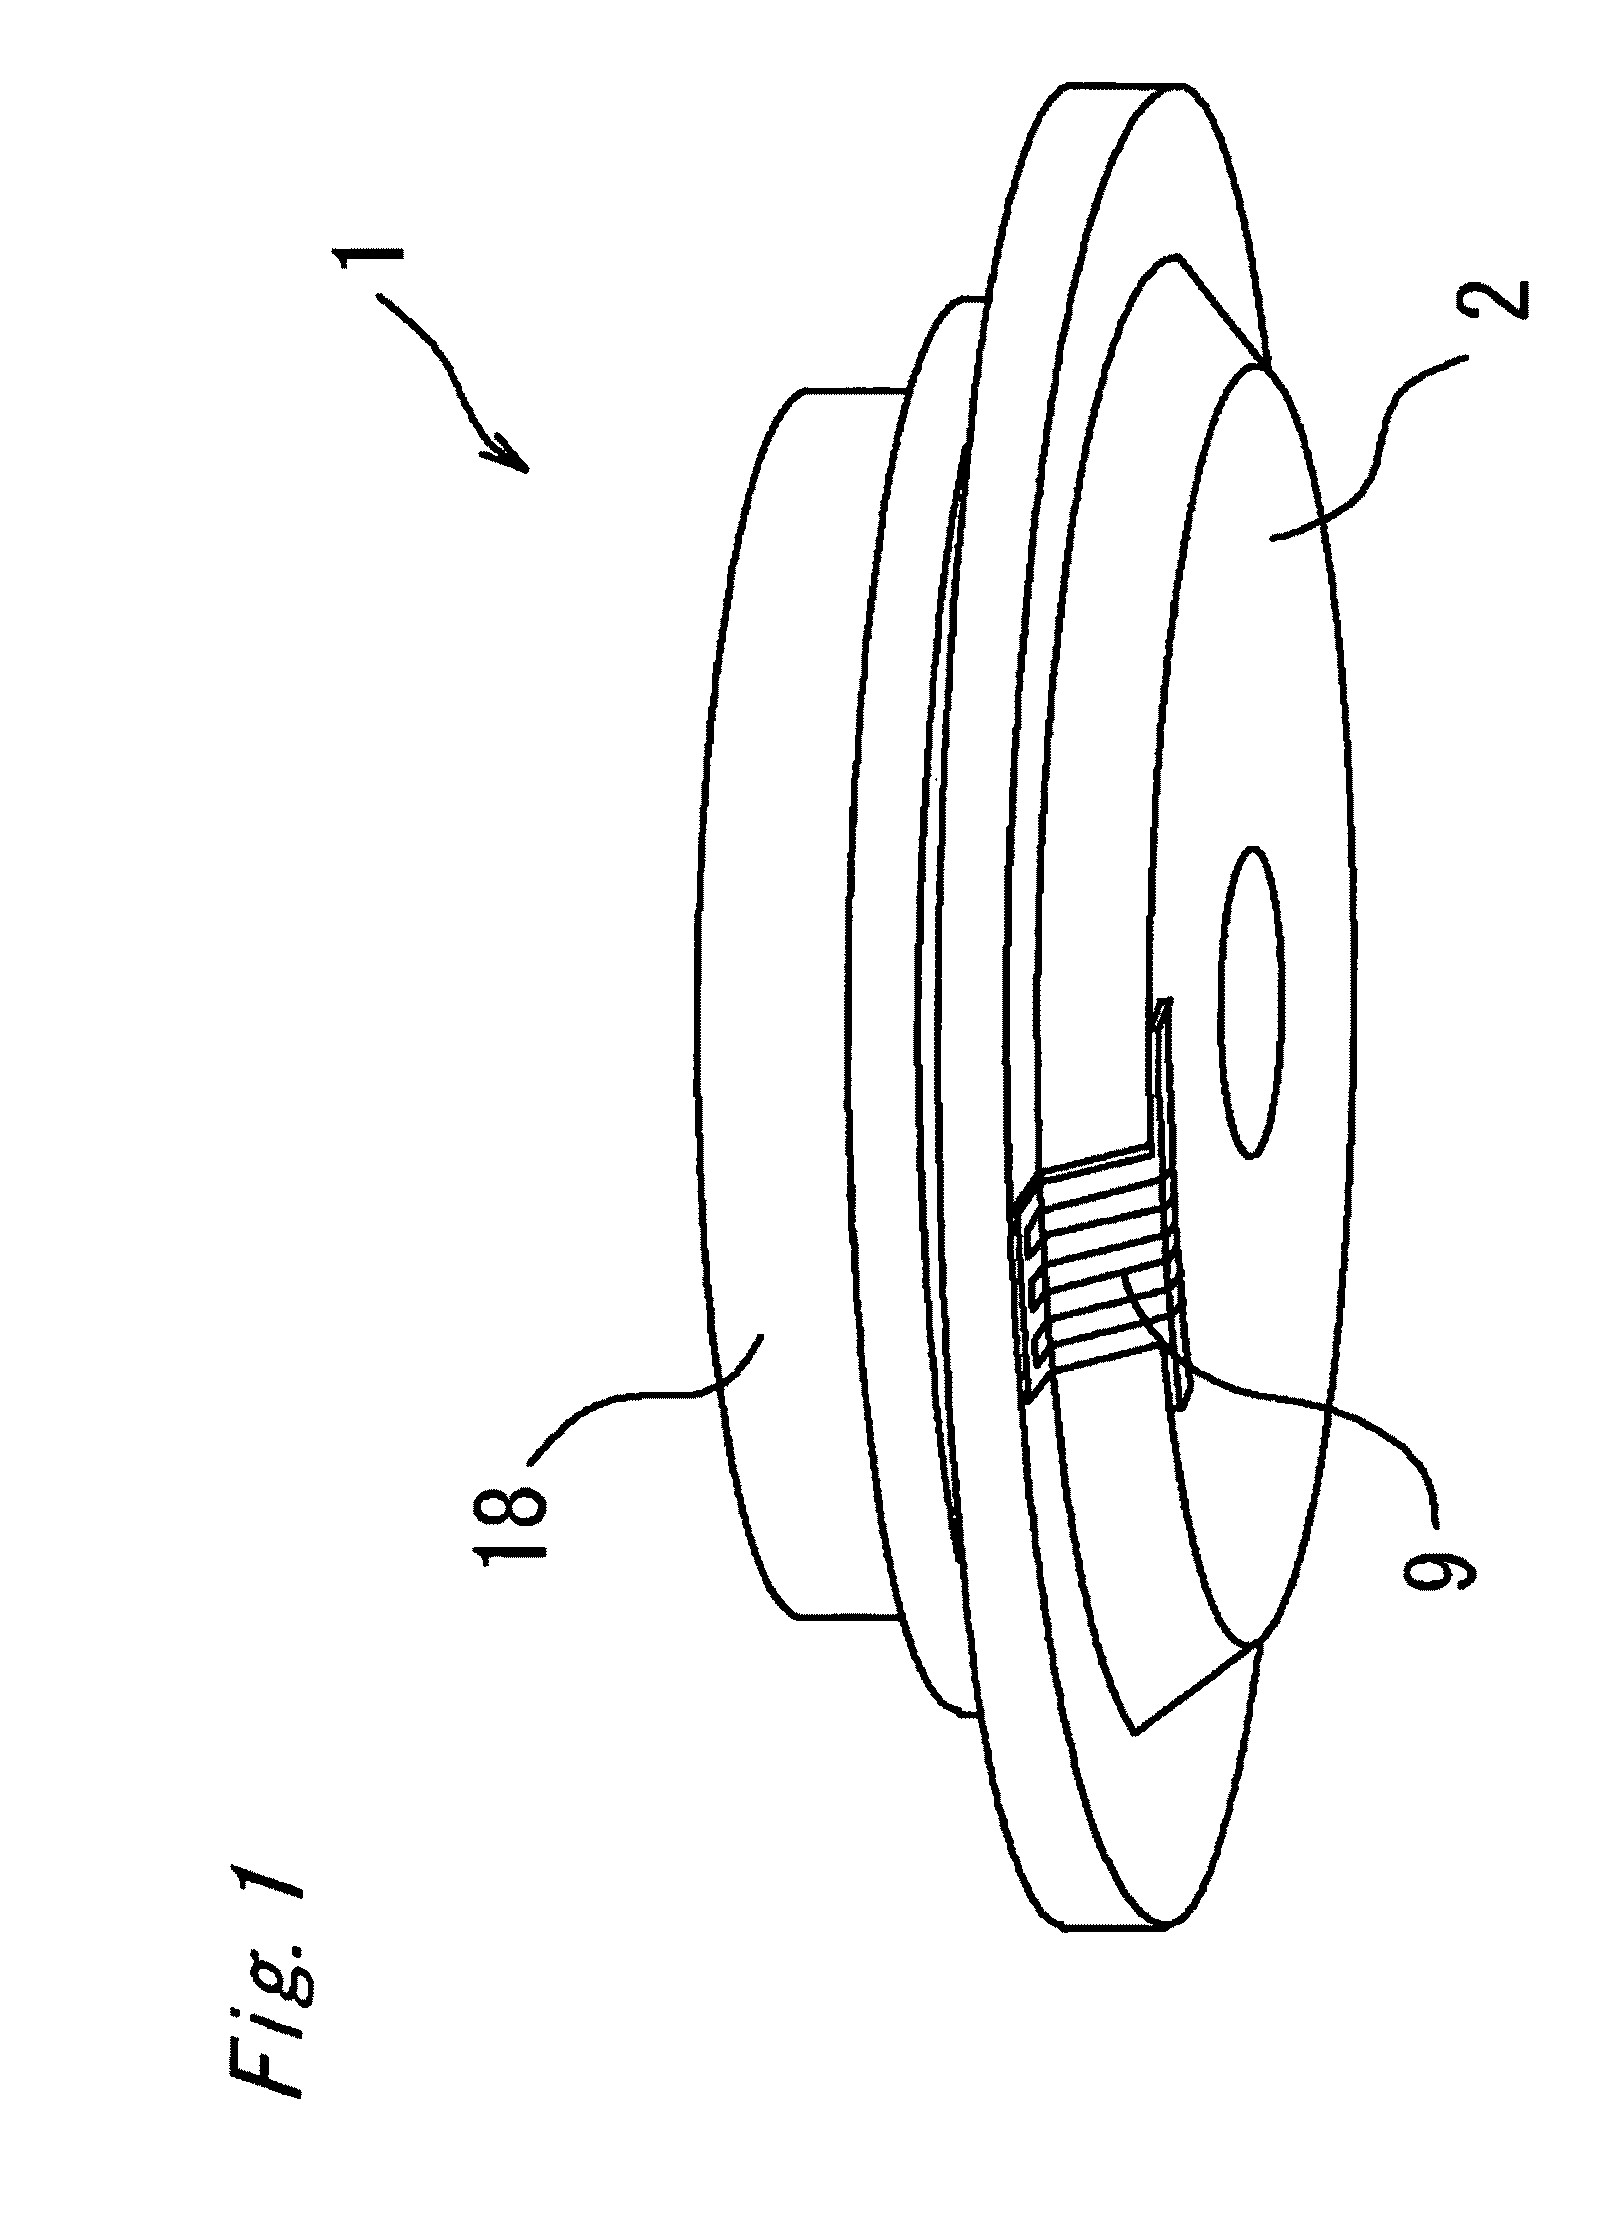 Motor with sheet-like coil